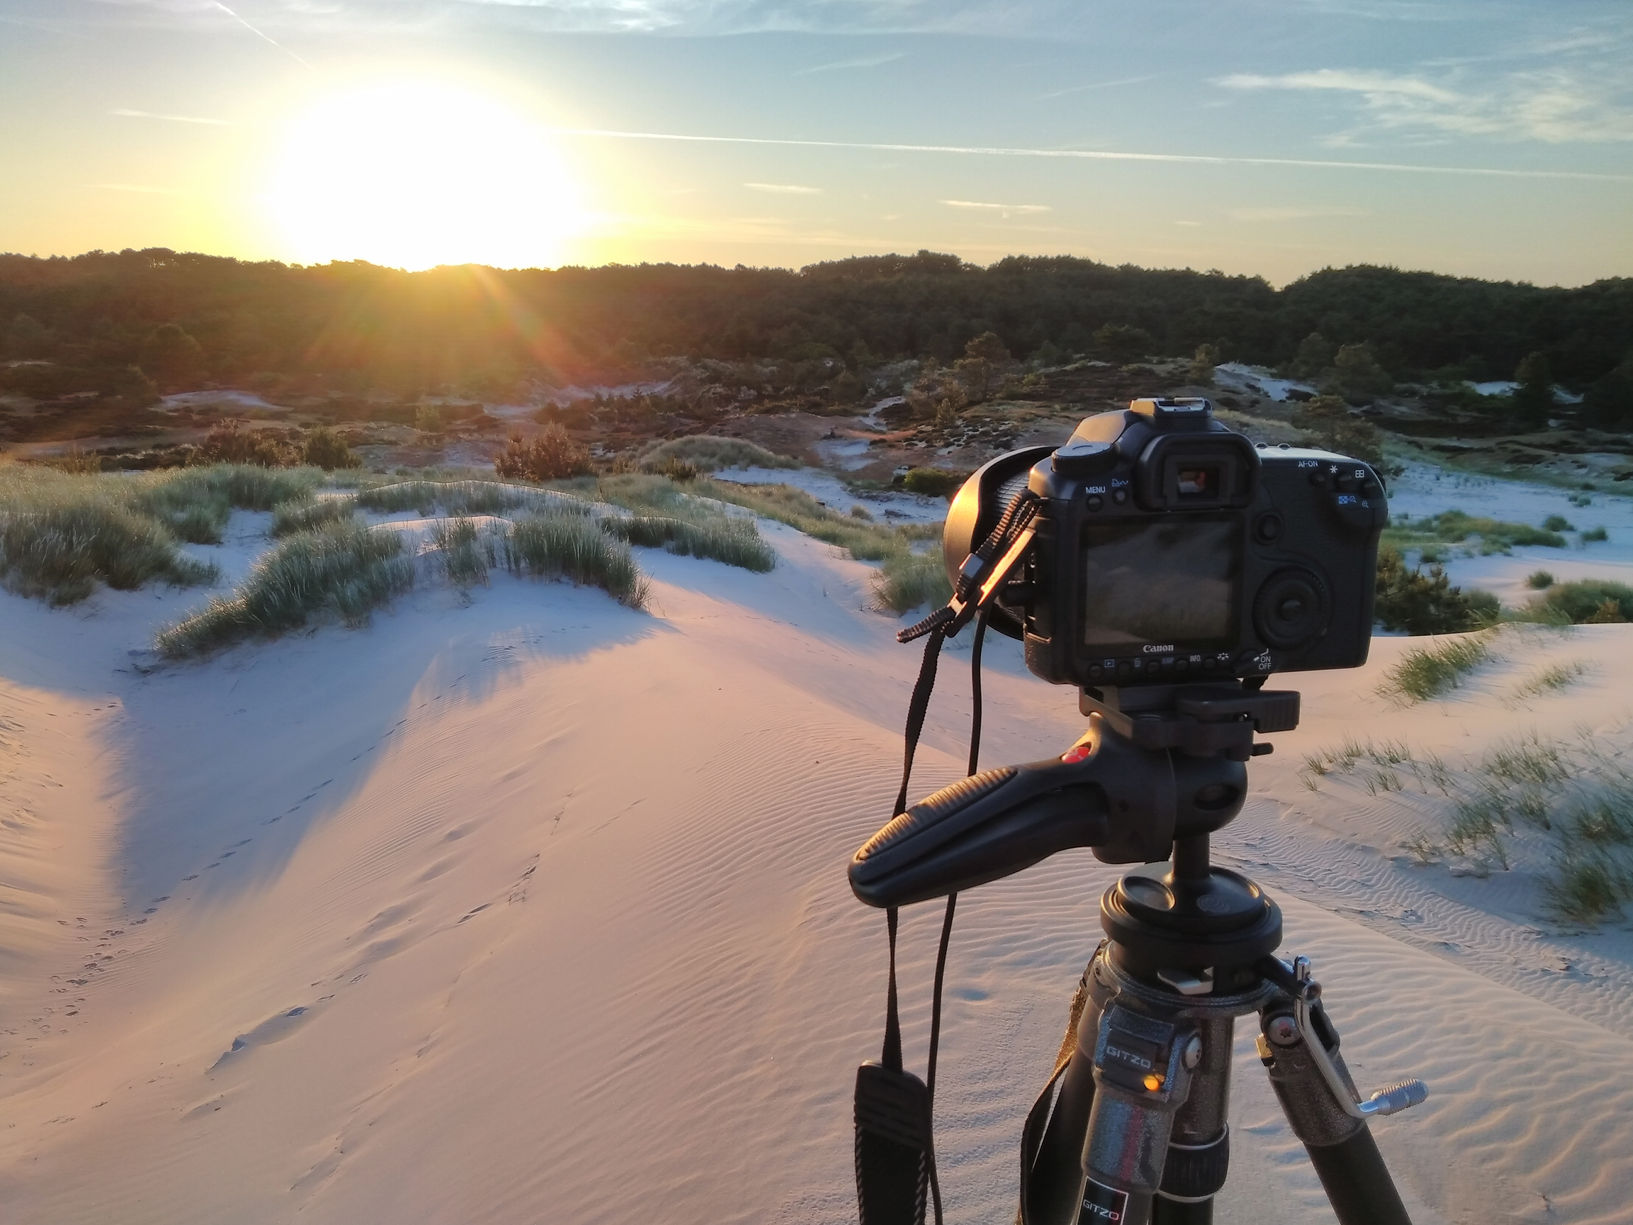 camera pointed at sunrise in dunes